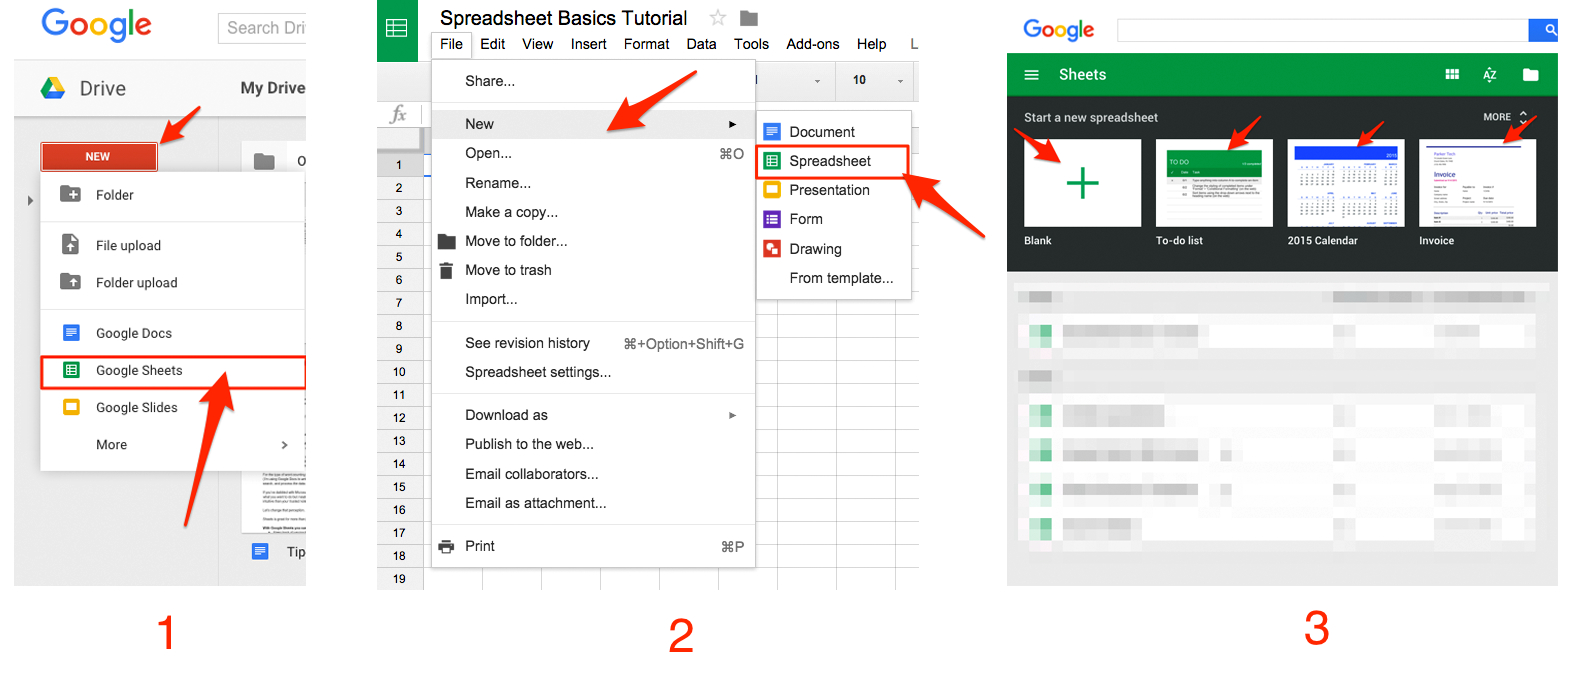 How To Make A Spreadsheet On Ipad Regarding Google Sheets 101: The Beginner's Guide To Online Spreadsheets  The